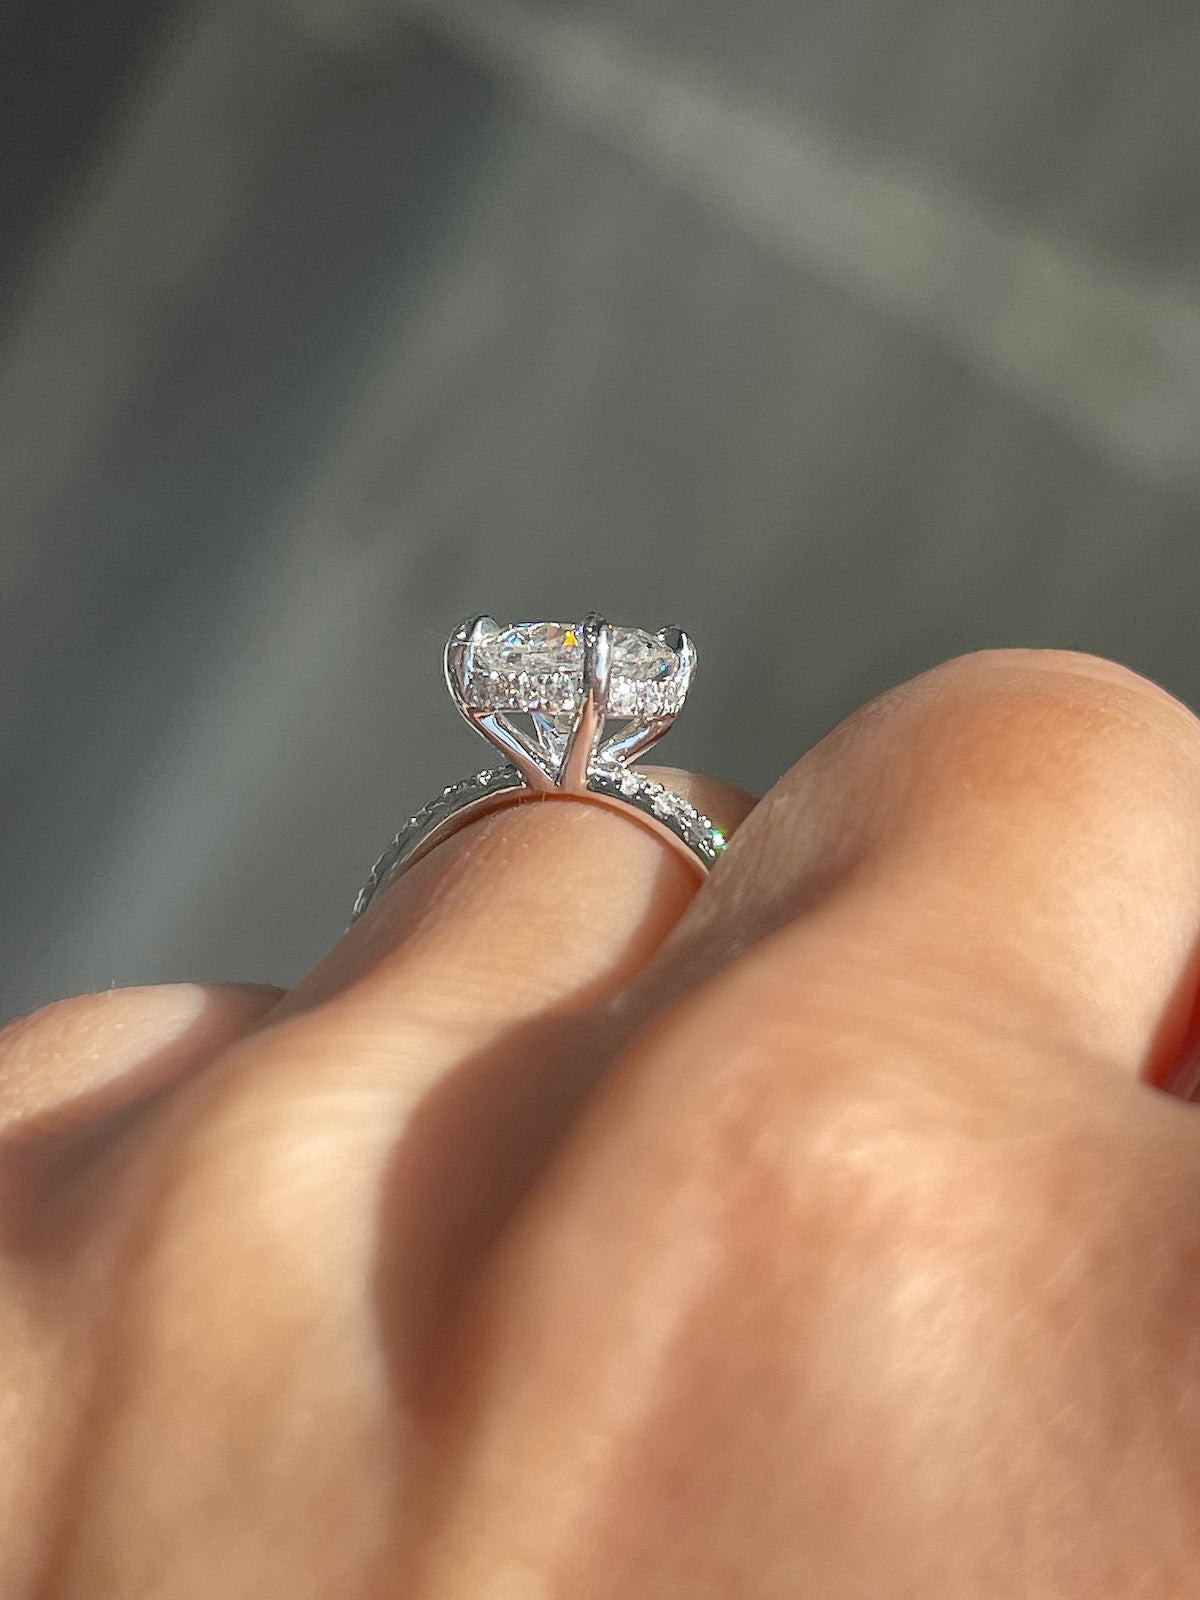 Load image into Gallery viewer, Engagement Ring Wednesday | 2.02 Round Brilliant Diamond - Happy Jewelers Fine Jewelry Lifetime Warranty
